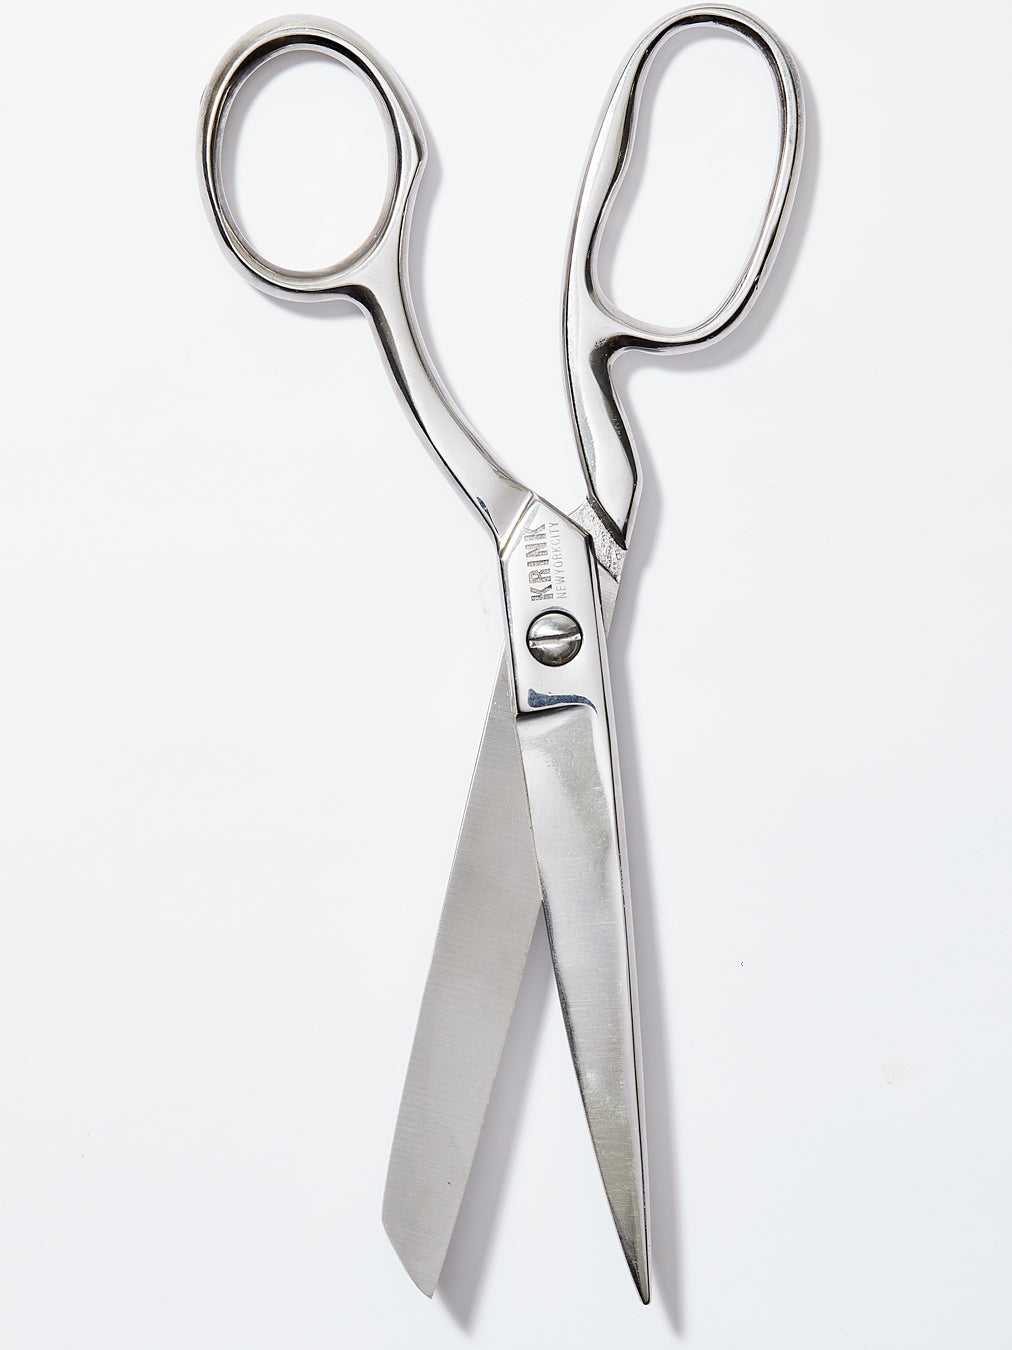 Drop Forged American made scissors, these two are about 30 years old and  the sharpest in the house. : r/Skookum